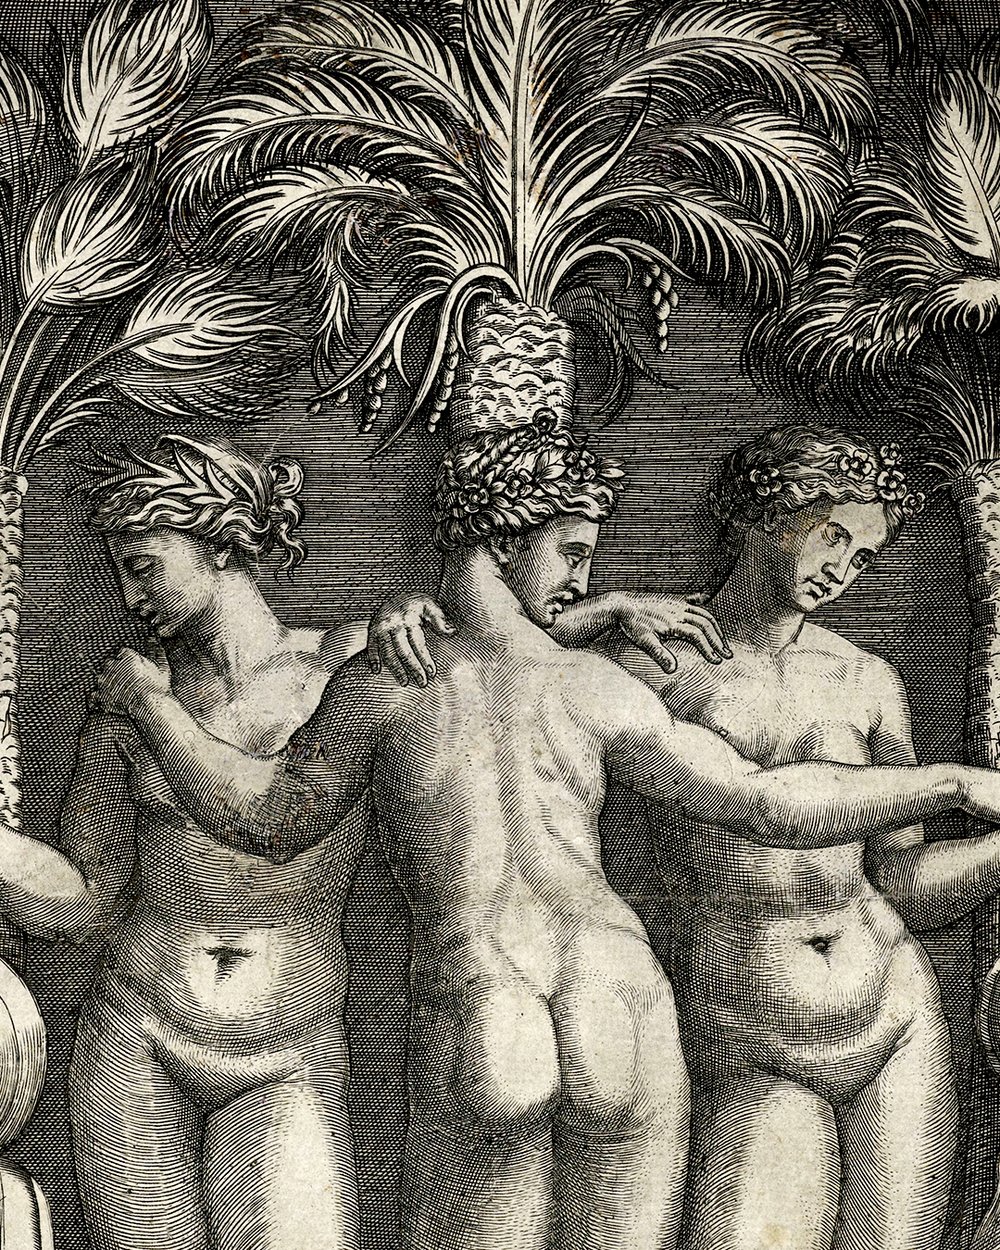 "Three graces standing in niche in front of three palm trees" (1510 - 1527)